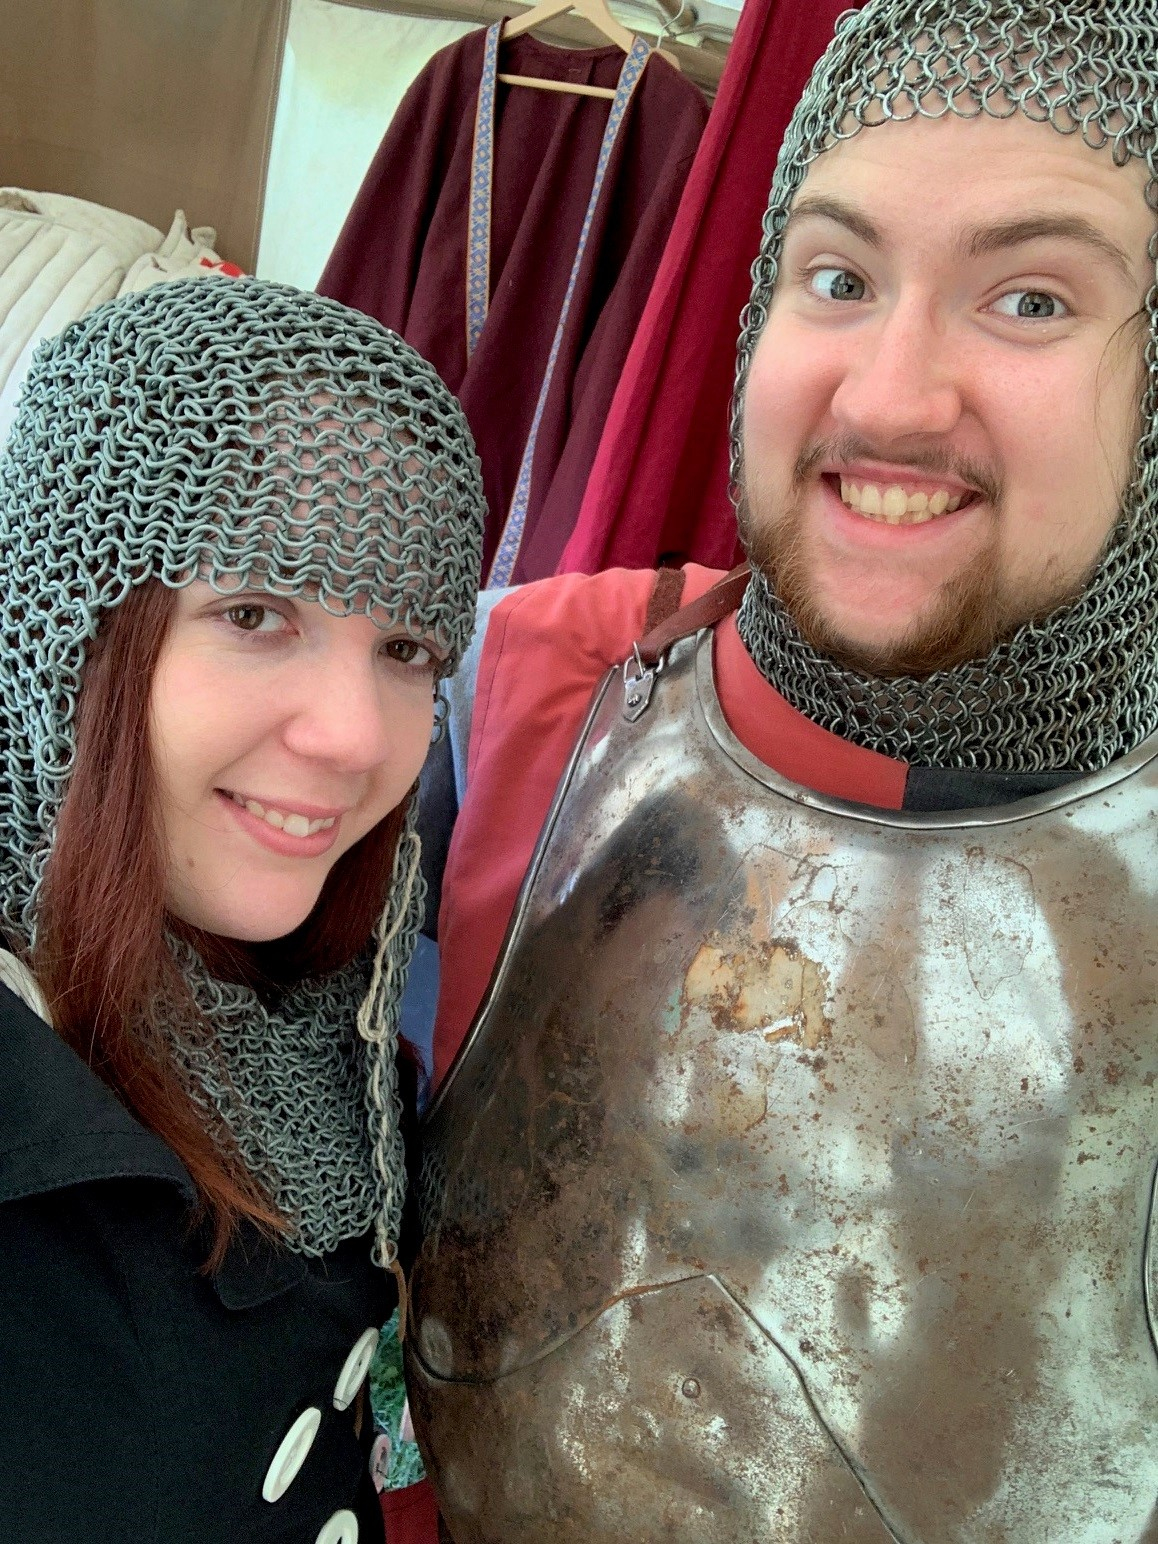 Lewis and Ameila wearing armour for a medieval festival